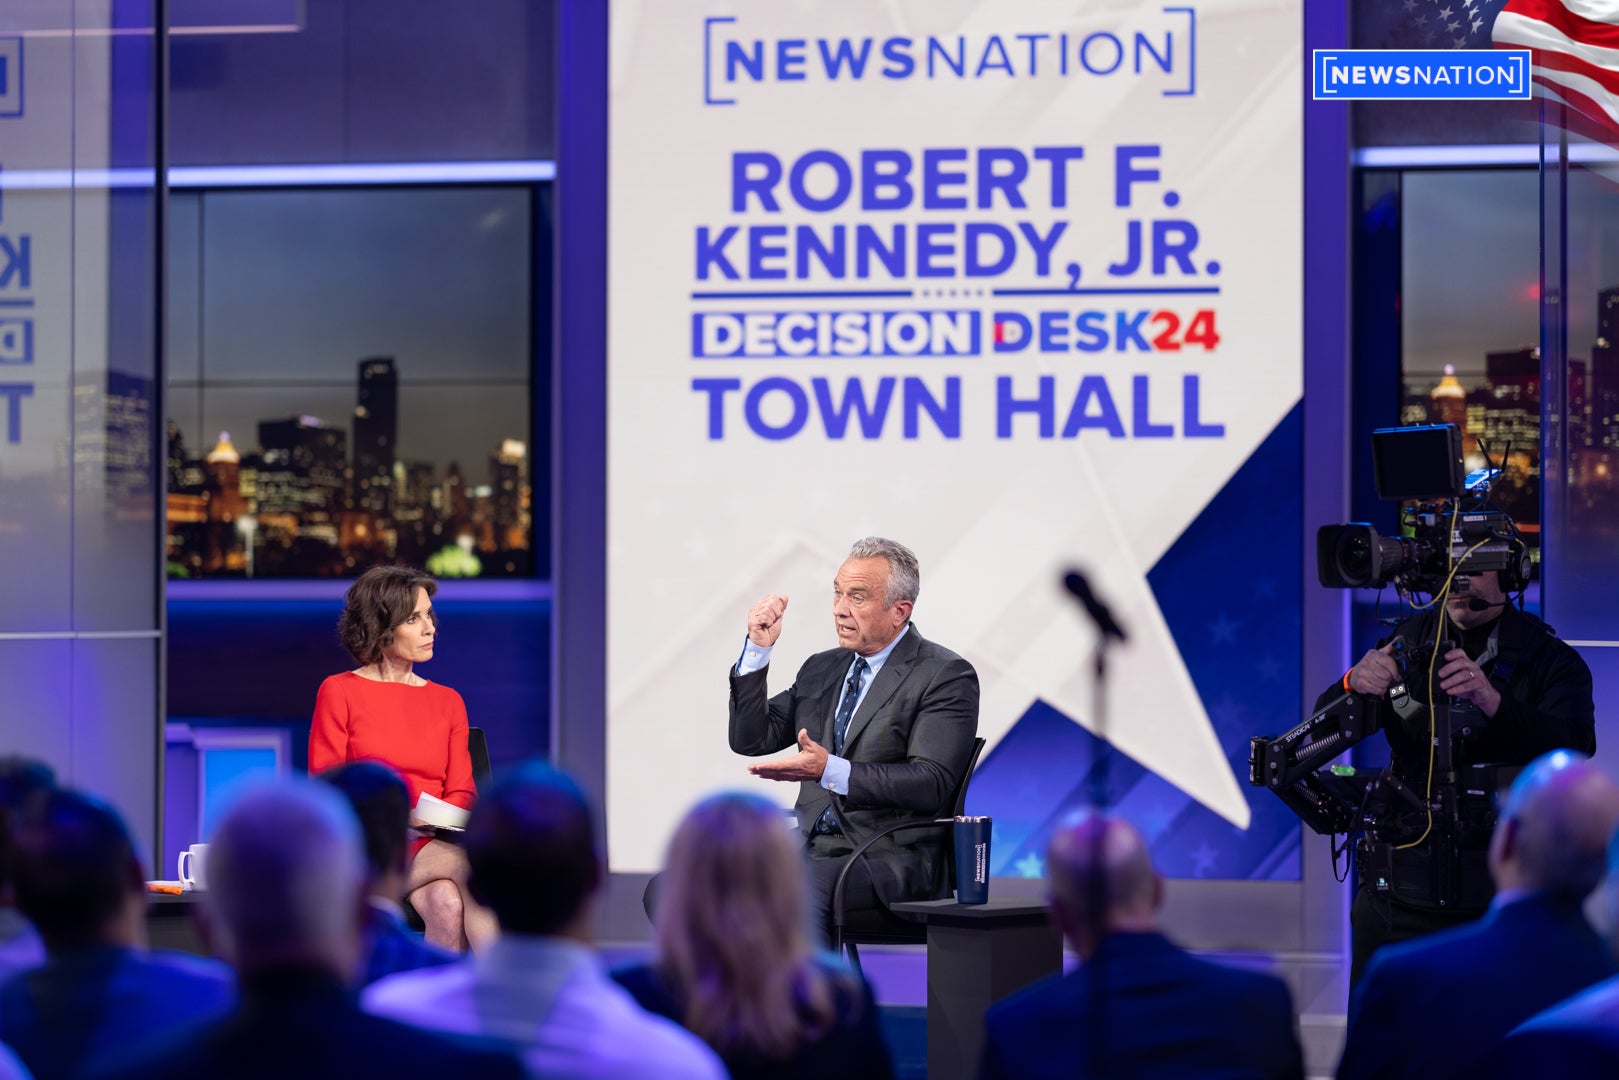 2024 candidate Robert F Kennedy Jr appears on NewsNation for a town hall